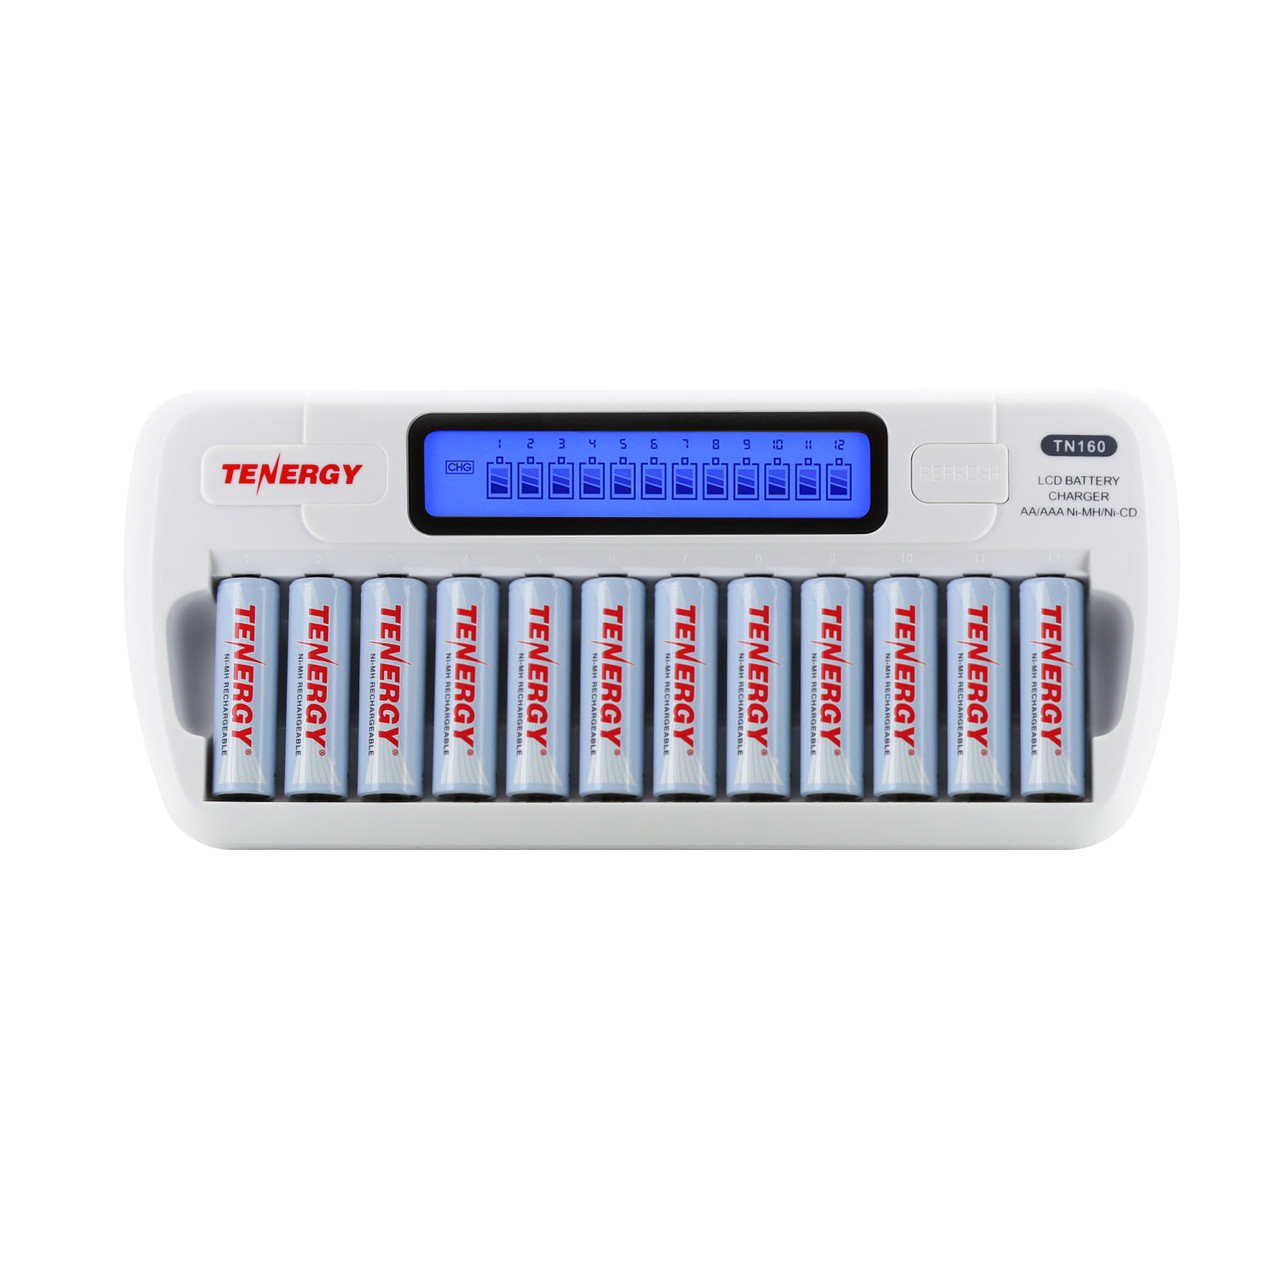 Tenergy AA NiMH Rechargeable Batteries (24pk) w/ Charger Tenergy